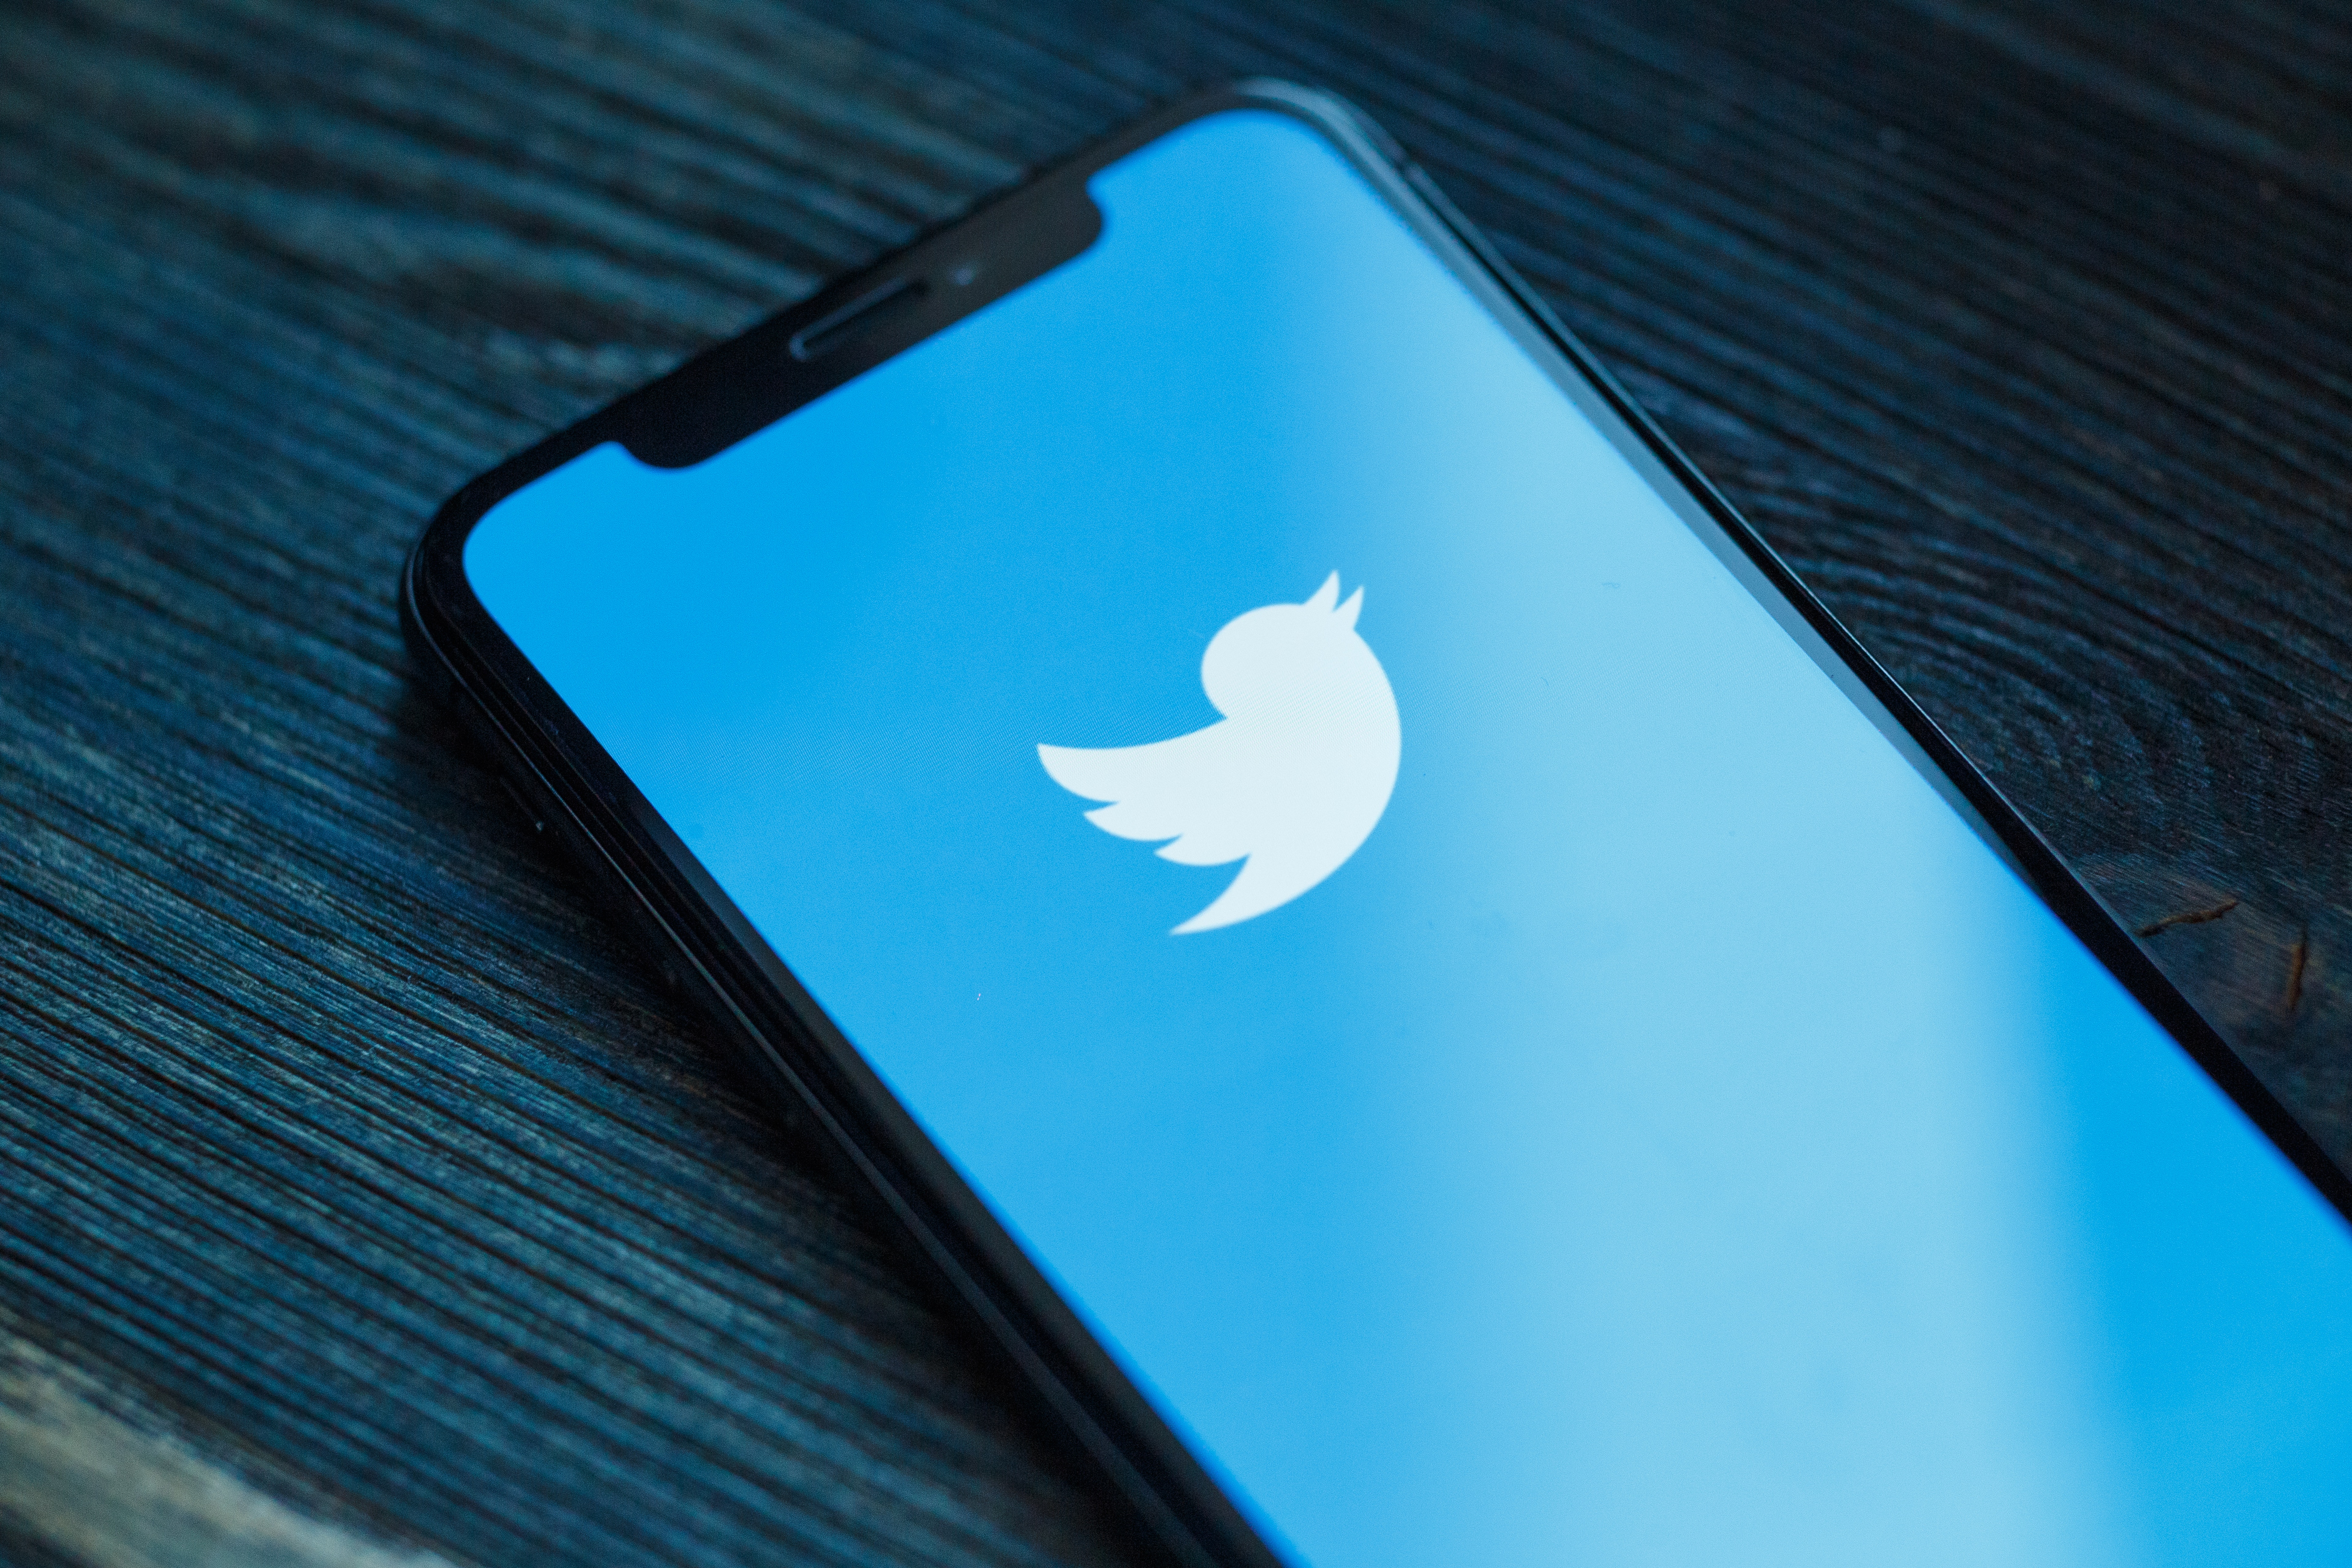 Twitter To Settle Complaint Alleging It Used User Phone Numbers To Target Ads For $150M